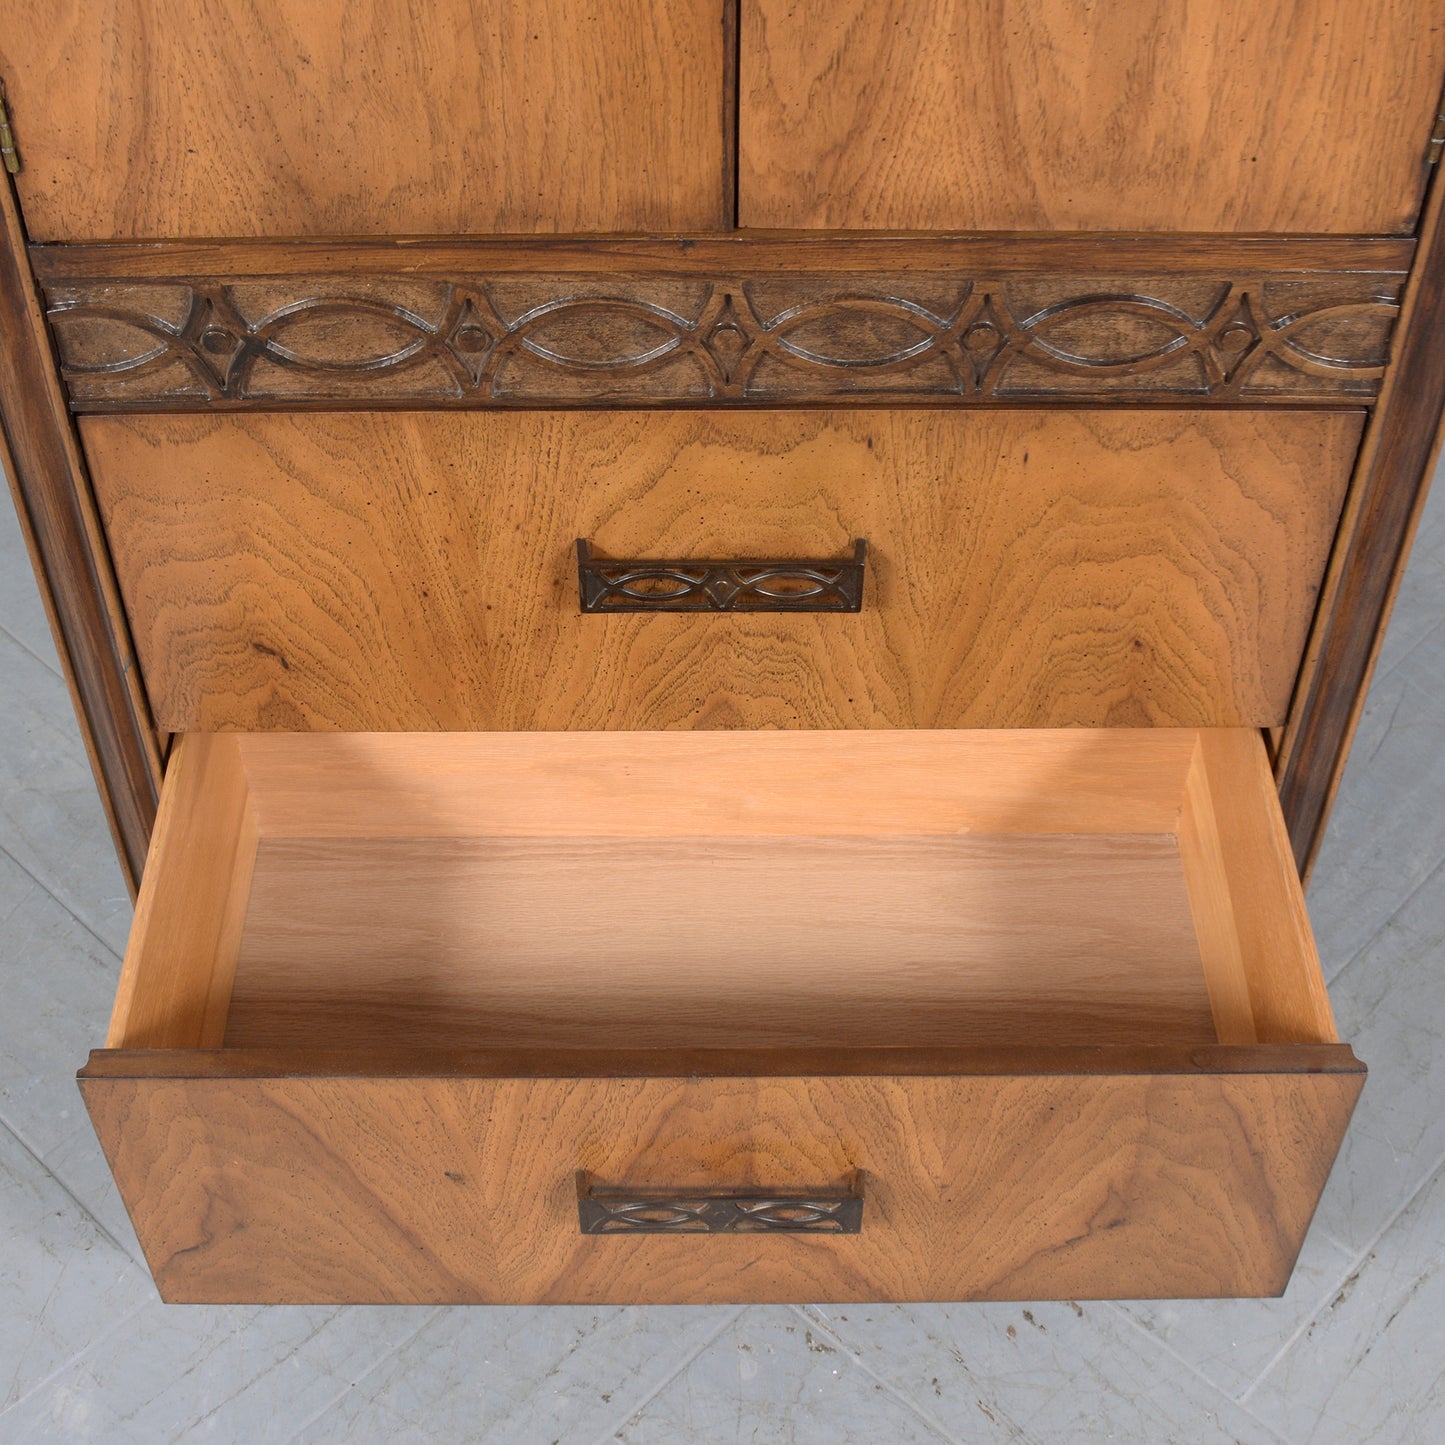 1960s Mid-Century Modern Walnut Bachelor Chest with Carved Details